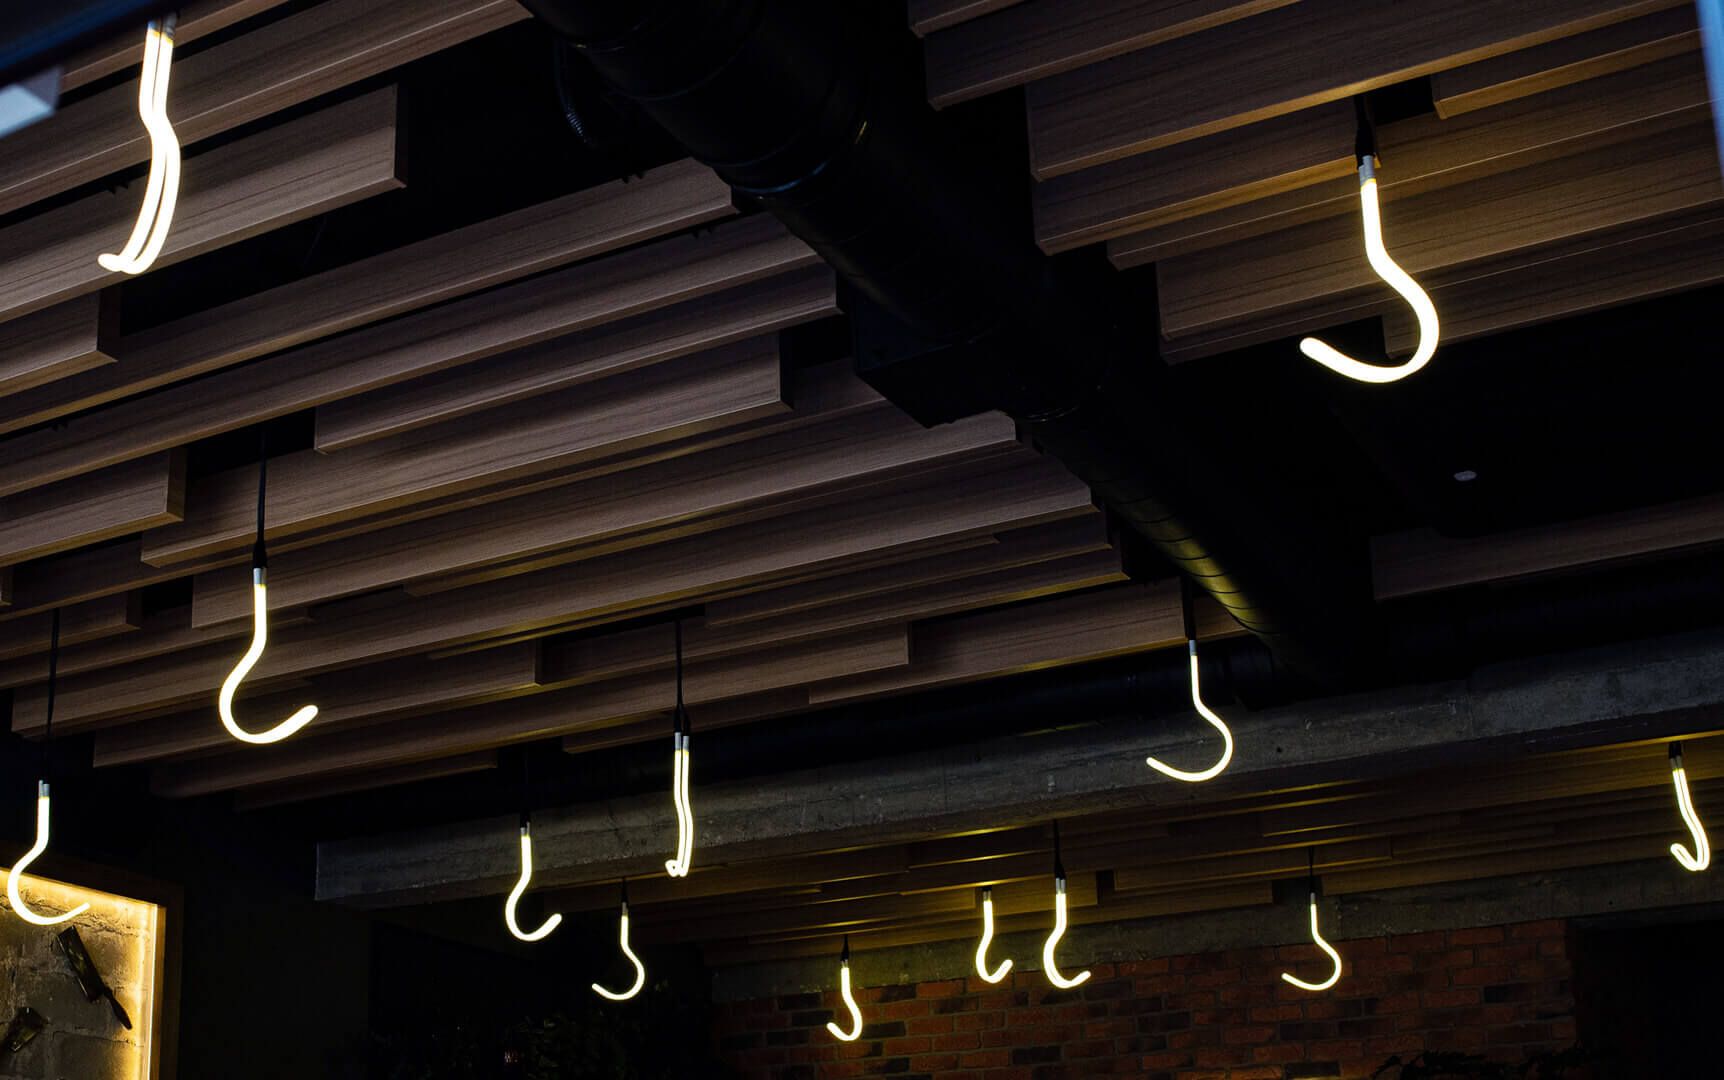 Neon hooks - Neon hooks on the ceiling in the steakhouse.